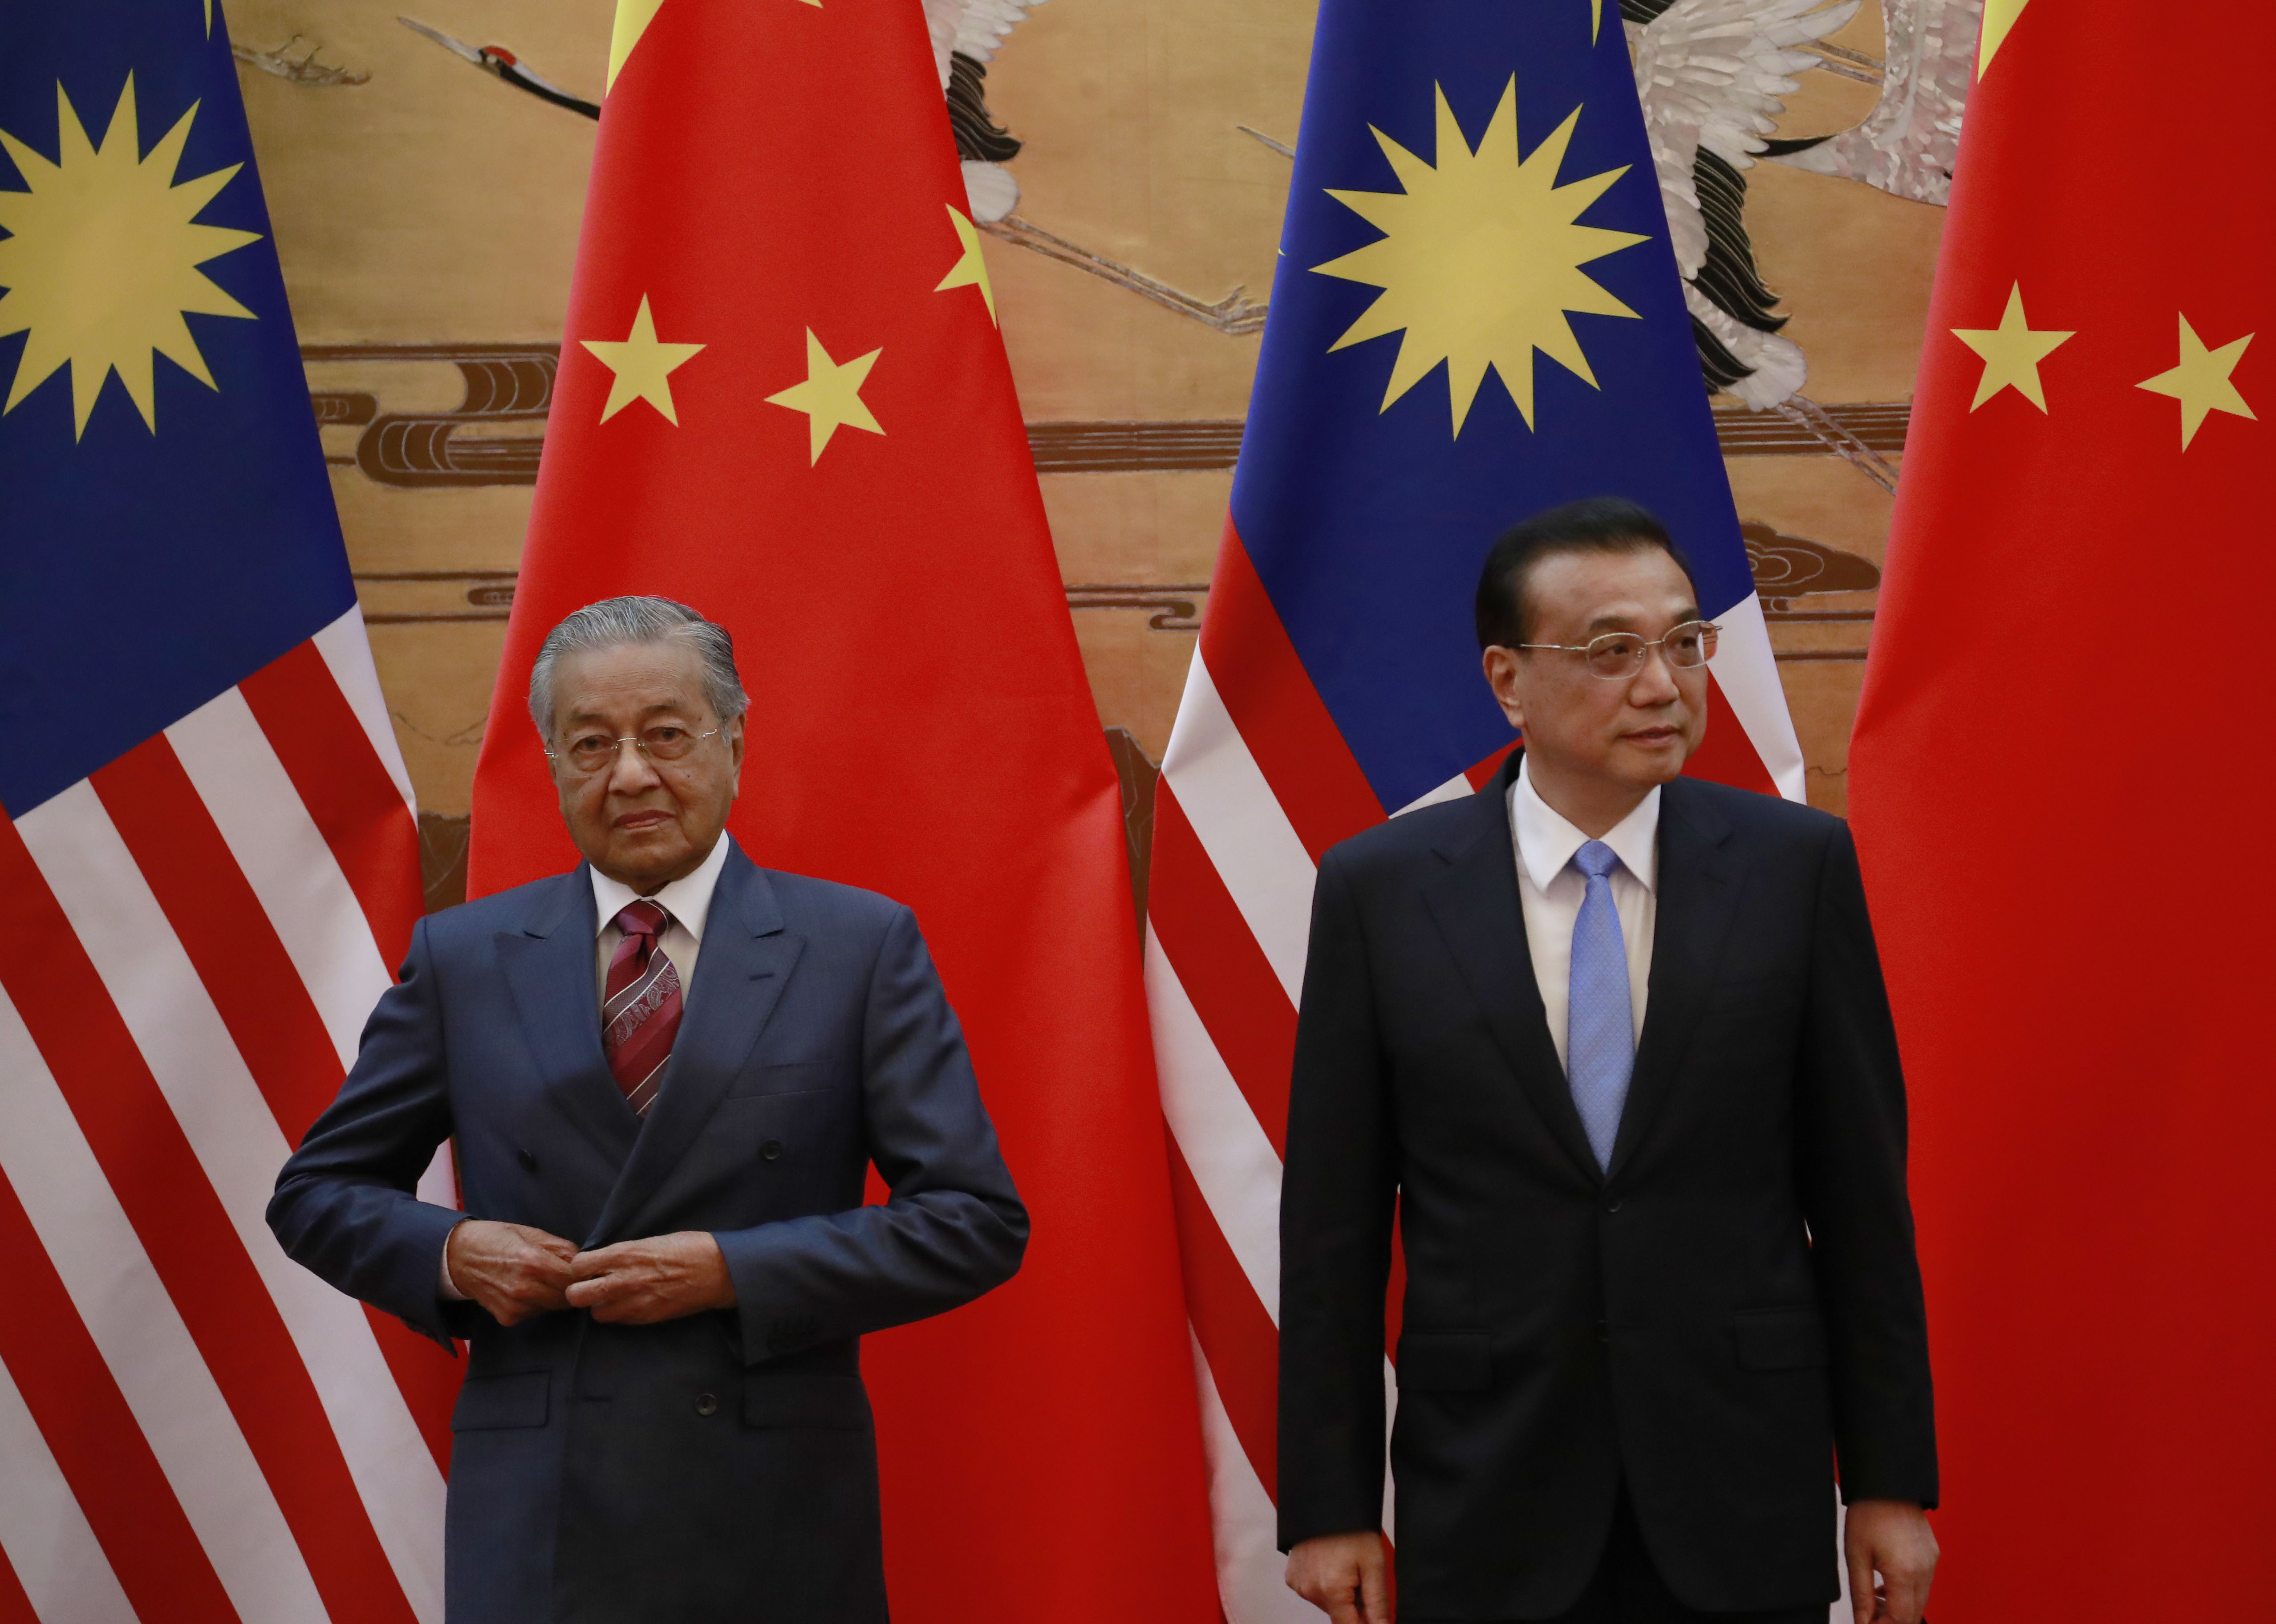 Malaysia’s&nbsp;Prime Minister Mahathir Mohamad has a waning appetite for Chinese influence in the country.